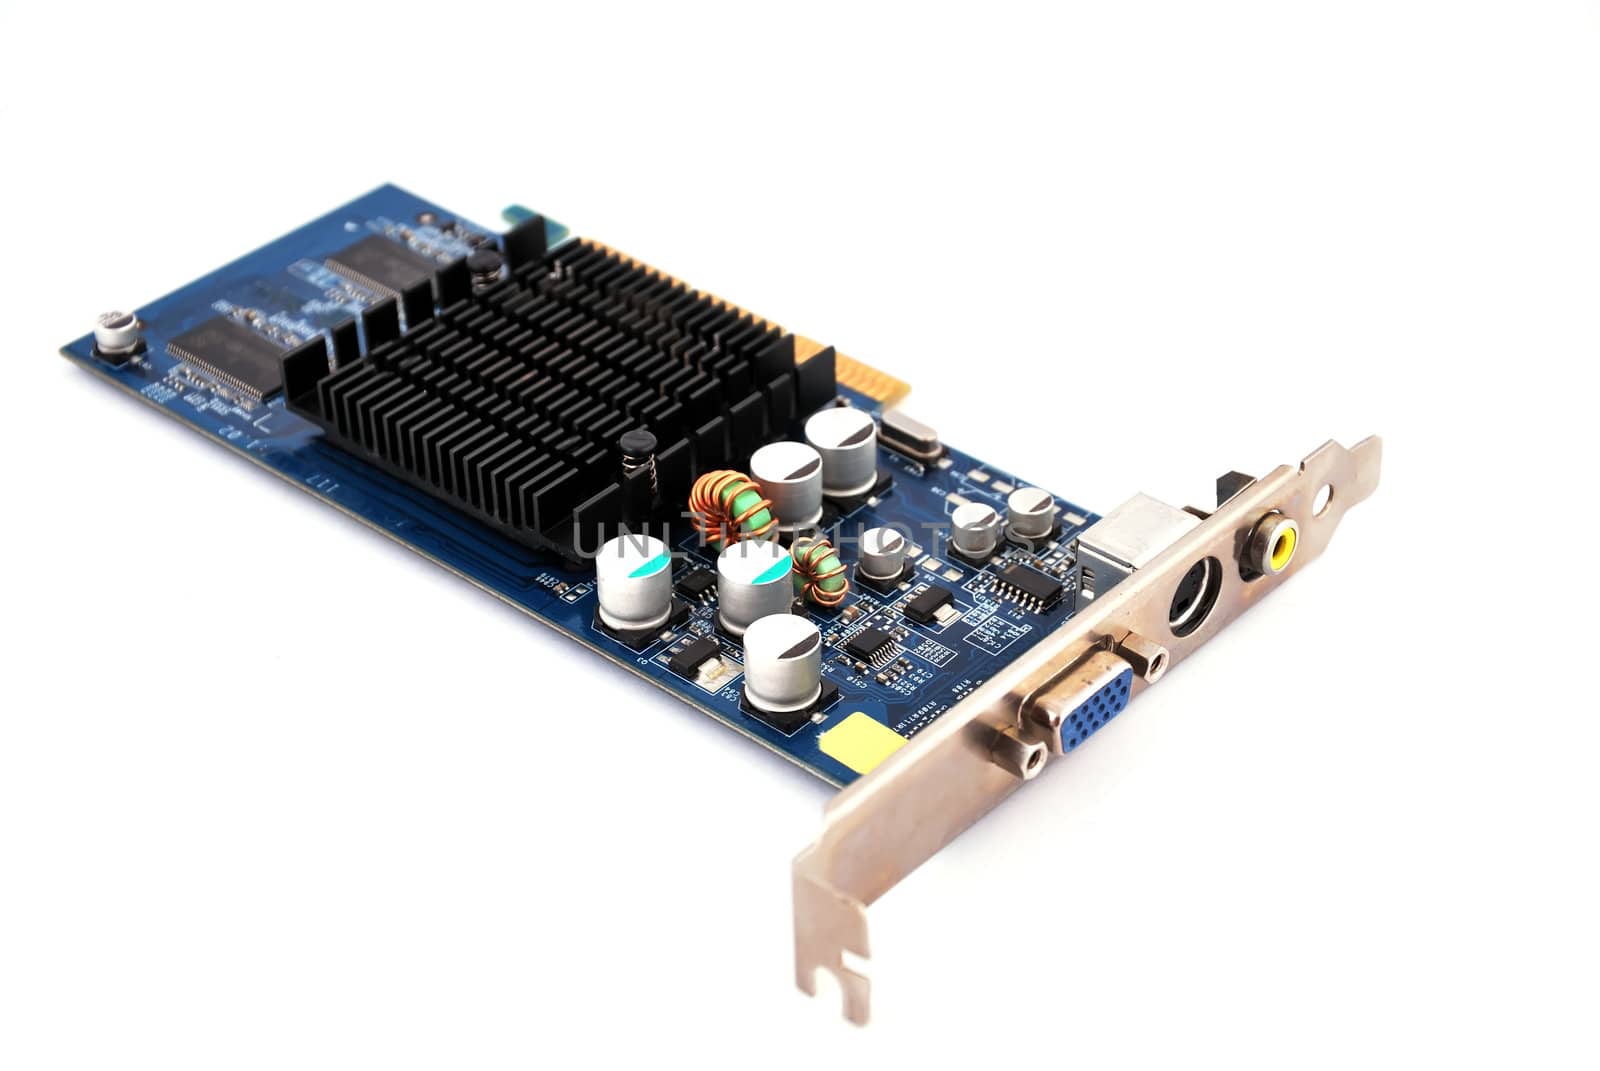 video card by vetkit